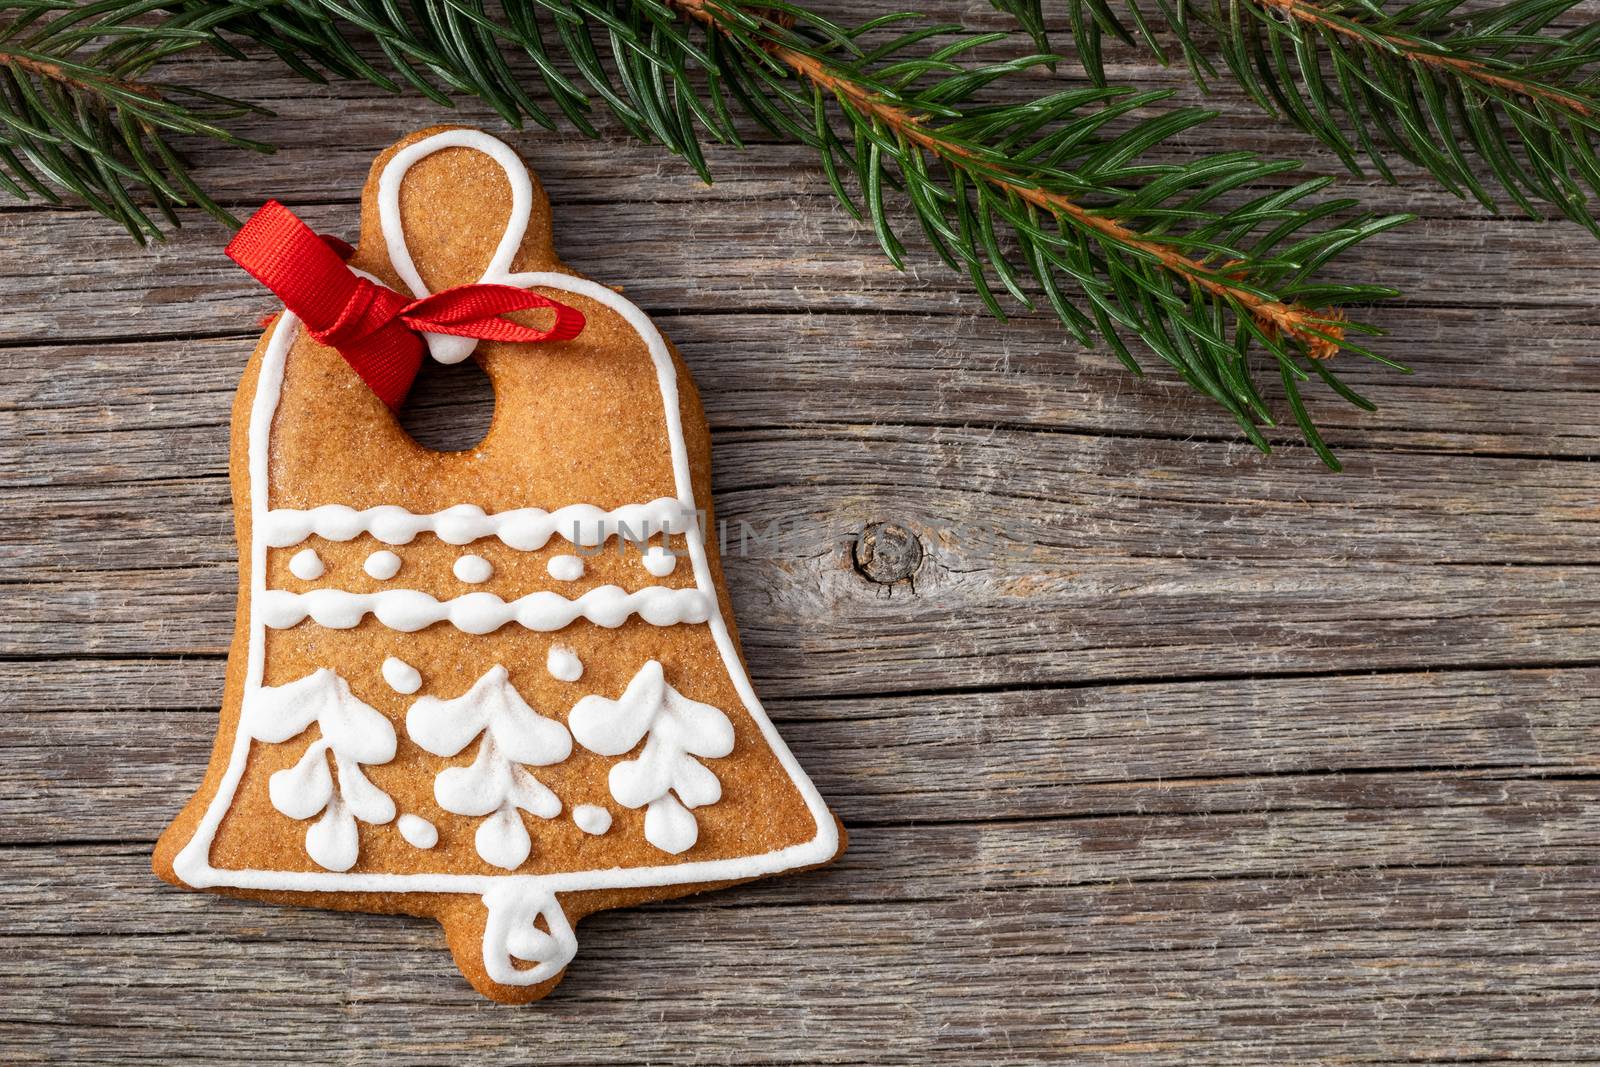 Gingerbread Christmas cookie and spruce branches on a wooden background with copy space